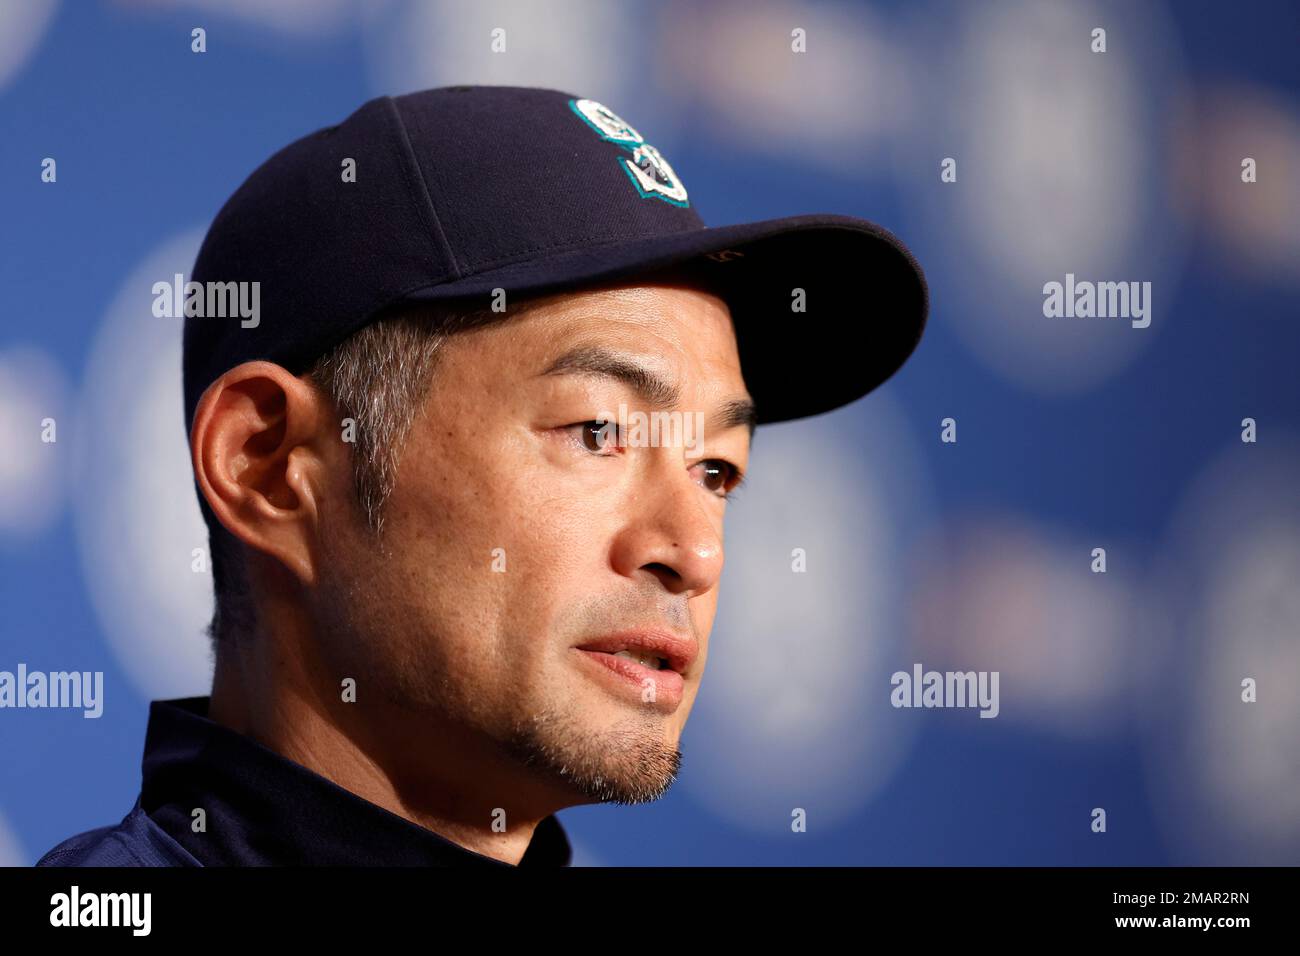 Seattle Mariners former baseball player Ichiro Suzuki, meets with the news  media, Friday, Aug. 26, 2022, in Seattle the day before his induction into  the Mariners' Hall of Fame. (AP Photo/John Froschauer